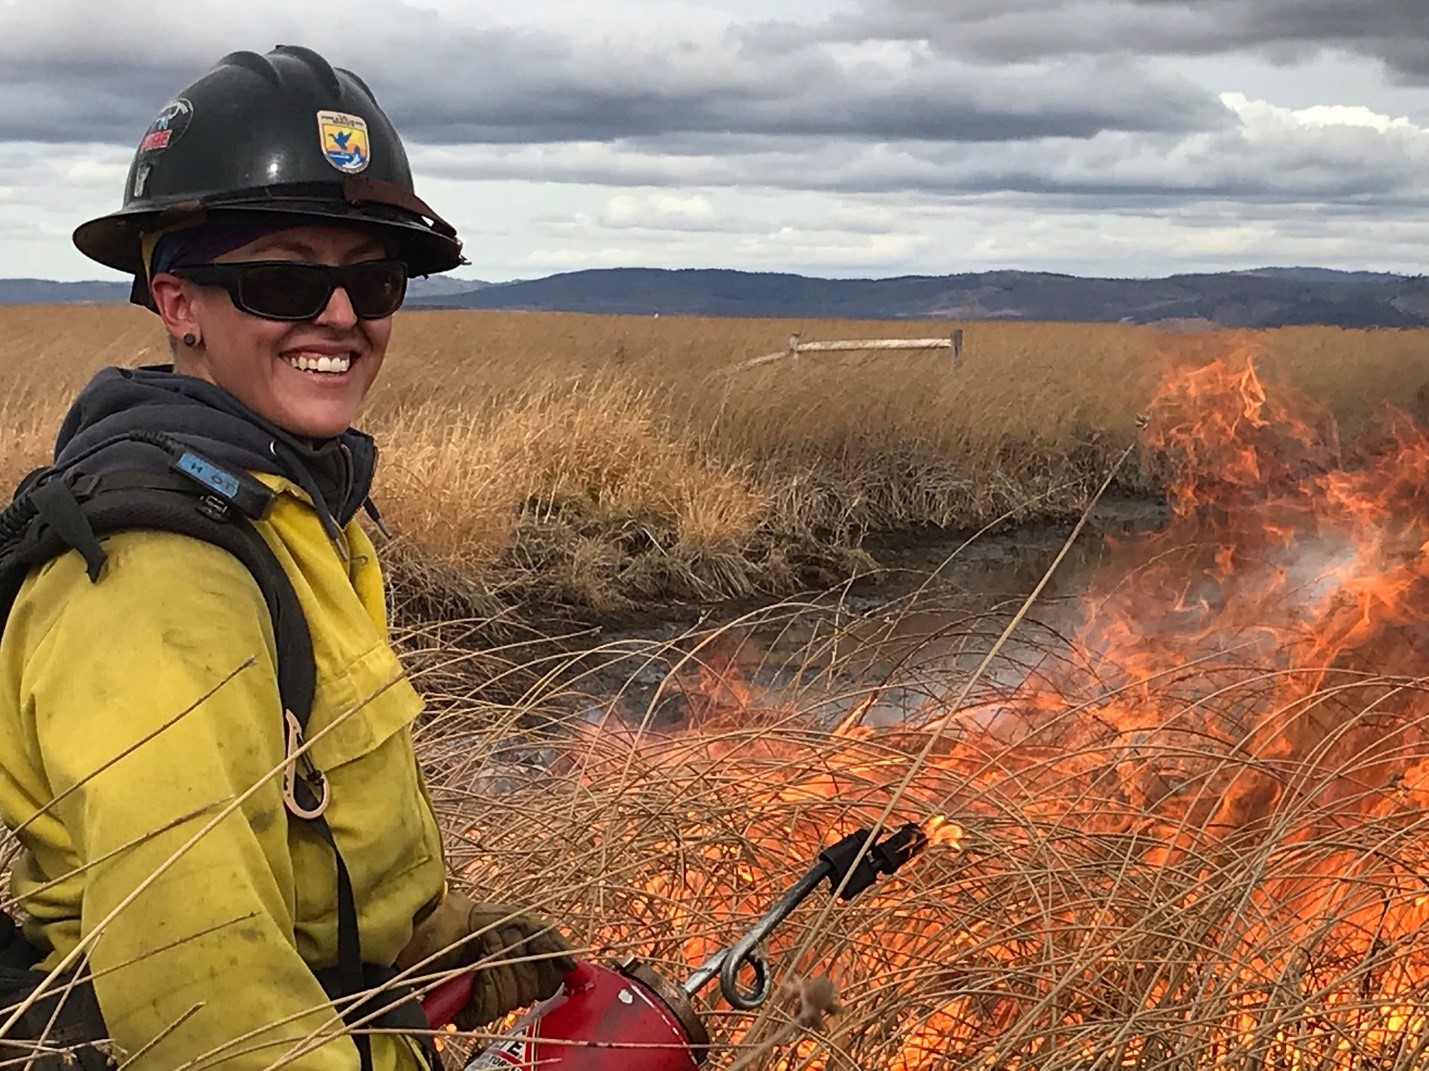 A firefighter wearing protective equipment, including a yellow jacket and brownish hard hat with the U.S. Fish and Wildlife Service logo, while smiling at the camera as fire burns brown, dry vegetation in the background.